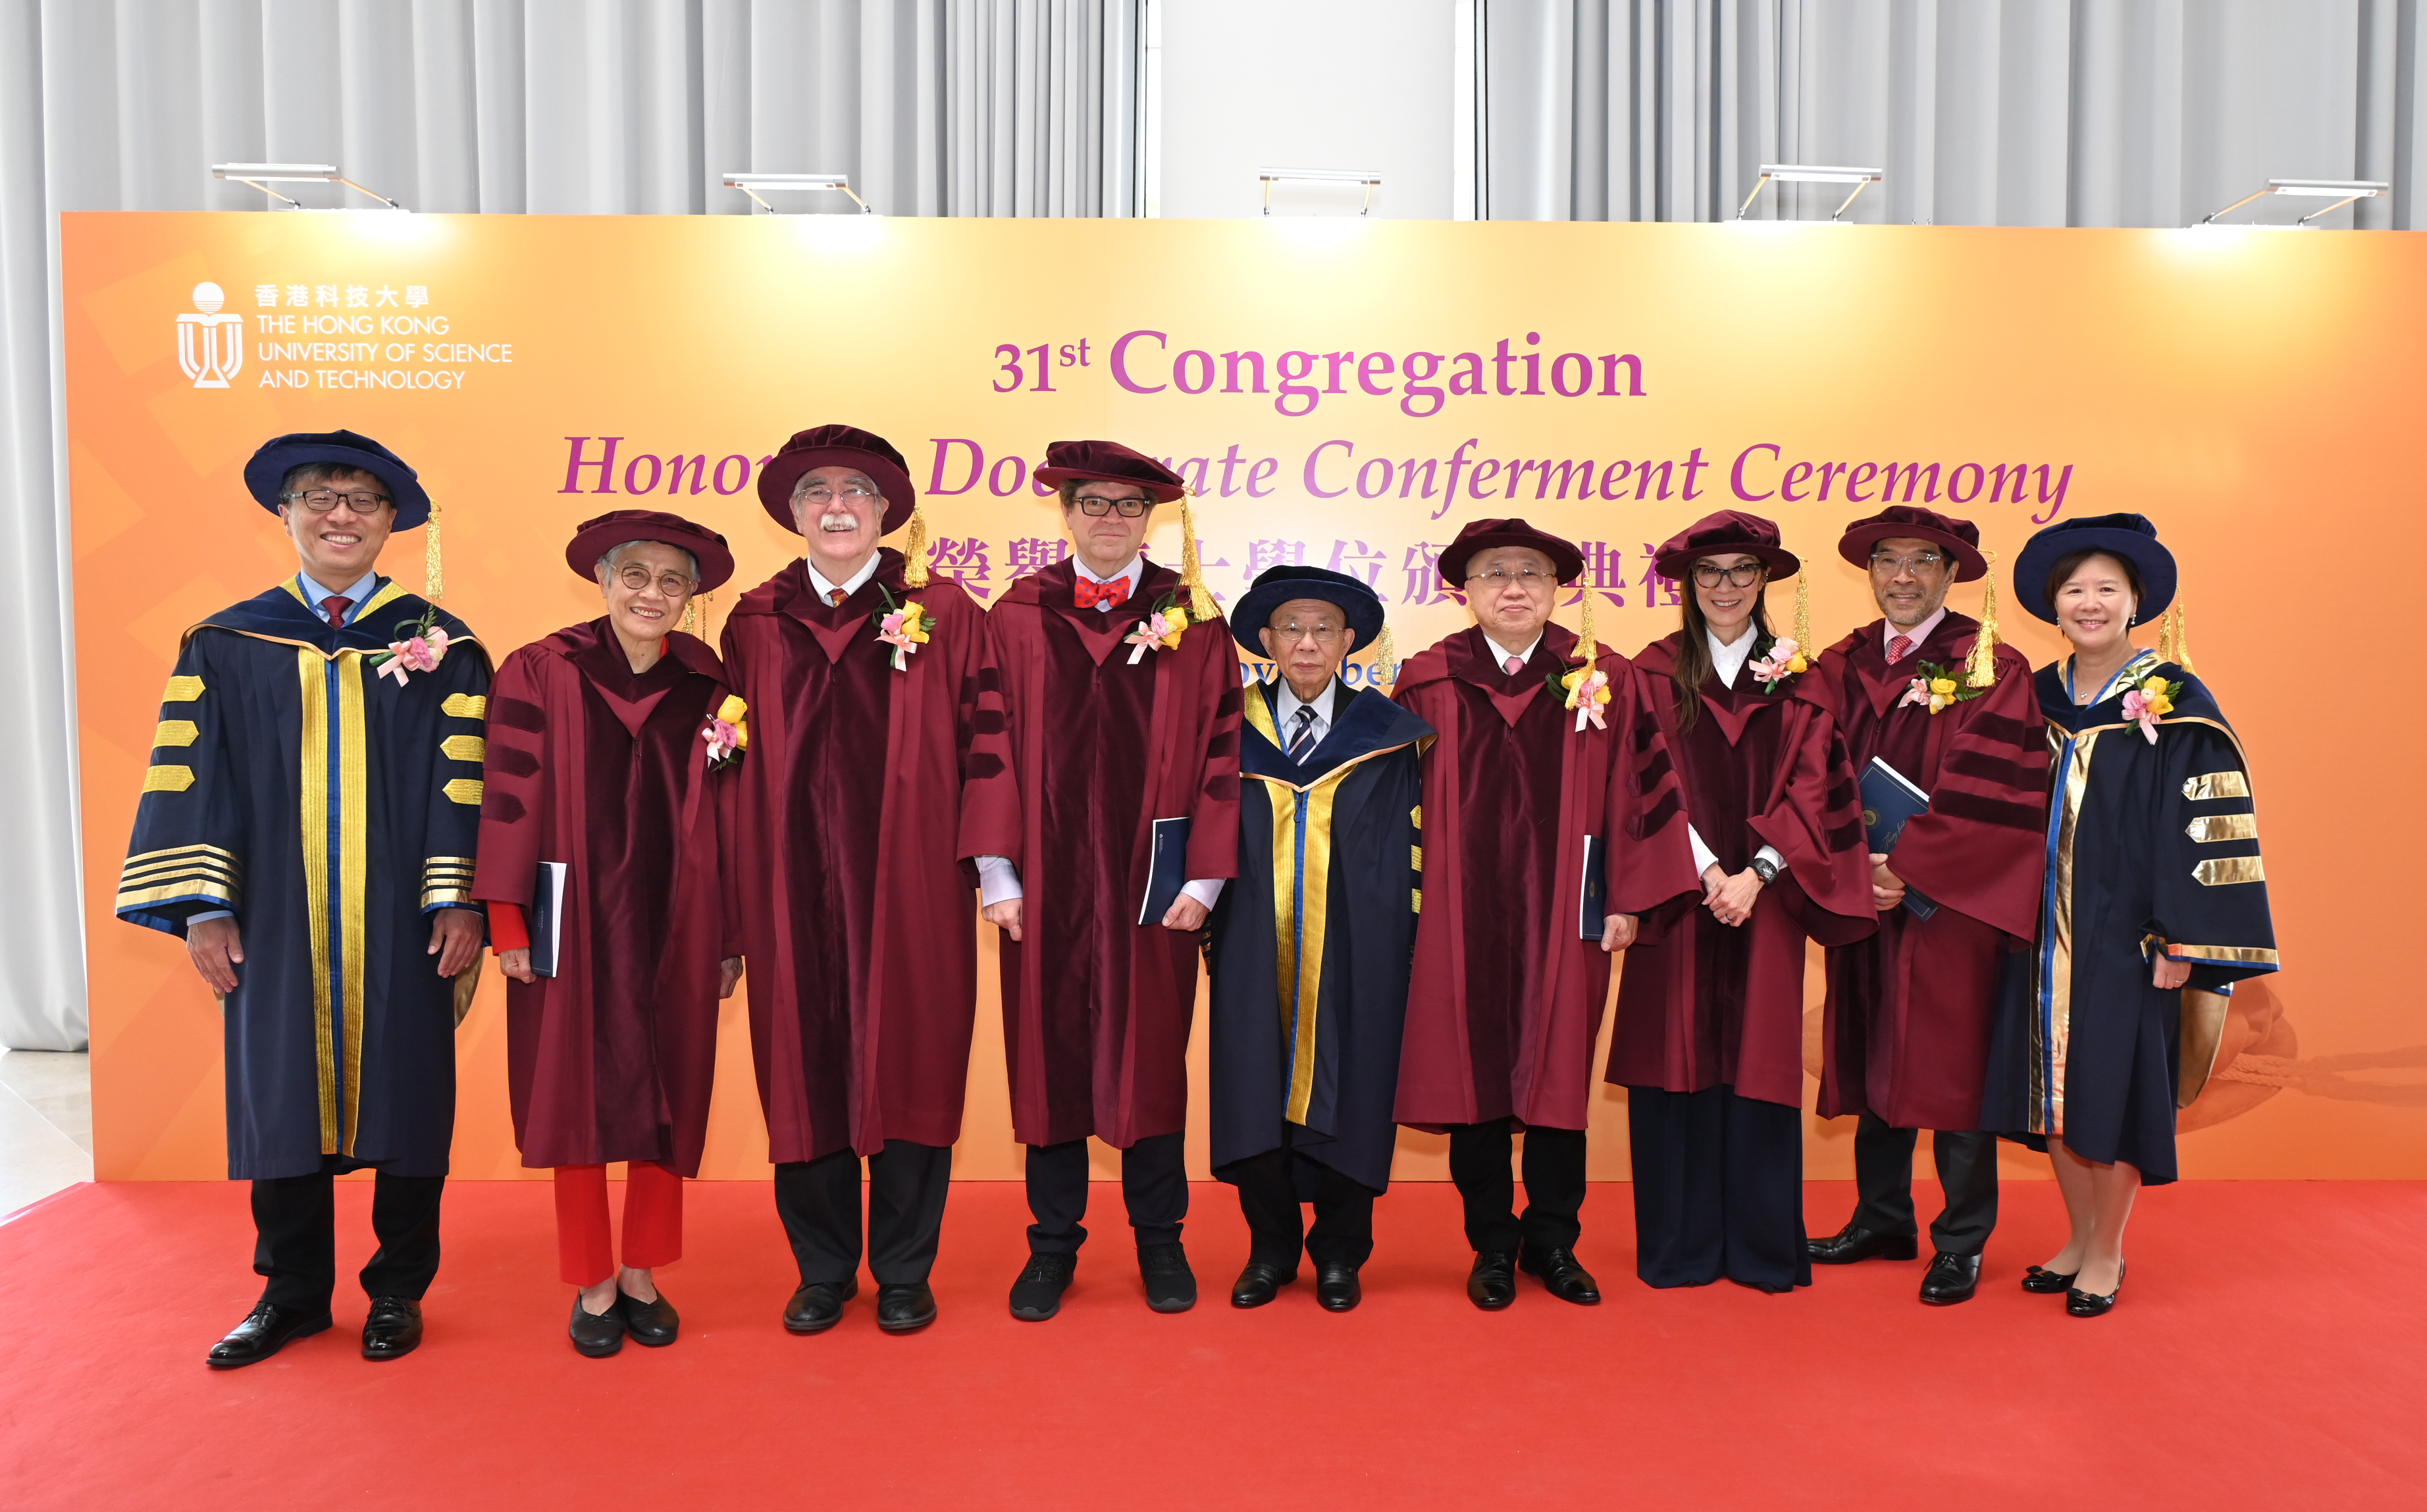 A group photo of HKUST Pro-Chancellor Dr. John CHAN Cho-Chak (middle), HKUST Council Chairman Harry SHUM (first left), HKUST President Prof. Nancy IP (first right), with the six Honorary Doctorate recipients (from left to right, in red robes) - Prof. Virginia LEE Man-Yee, Prof. Eric WIESCHAUS, Prof. Yann LECUN, Dr. Andrew LIAO Cheung-sing, Dr. Michelle YEOH Choo-Kheng and Dr. Carlson TONG.